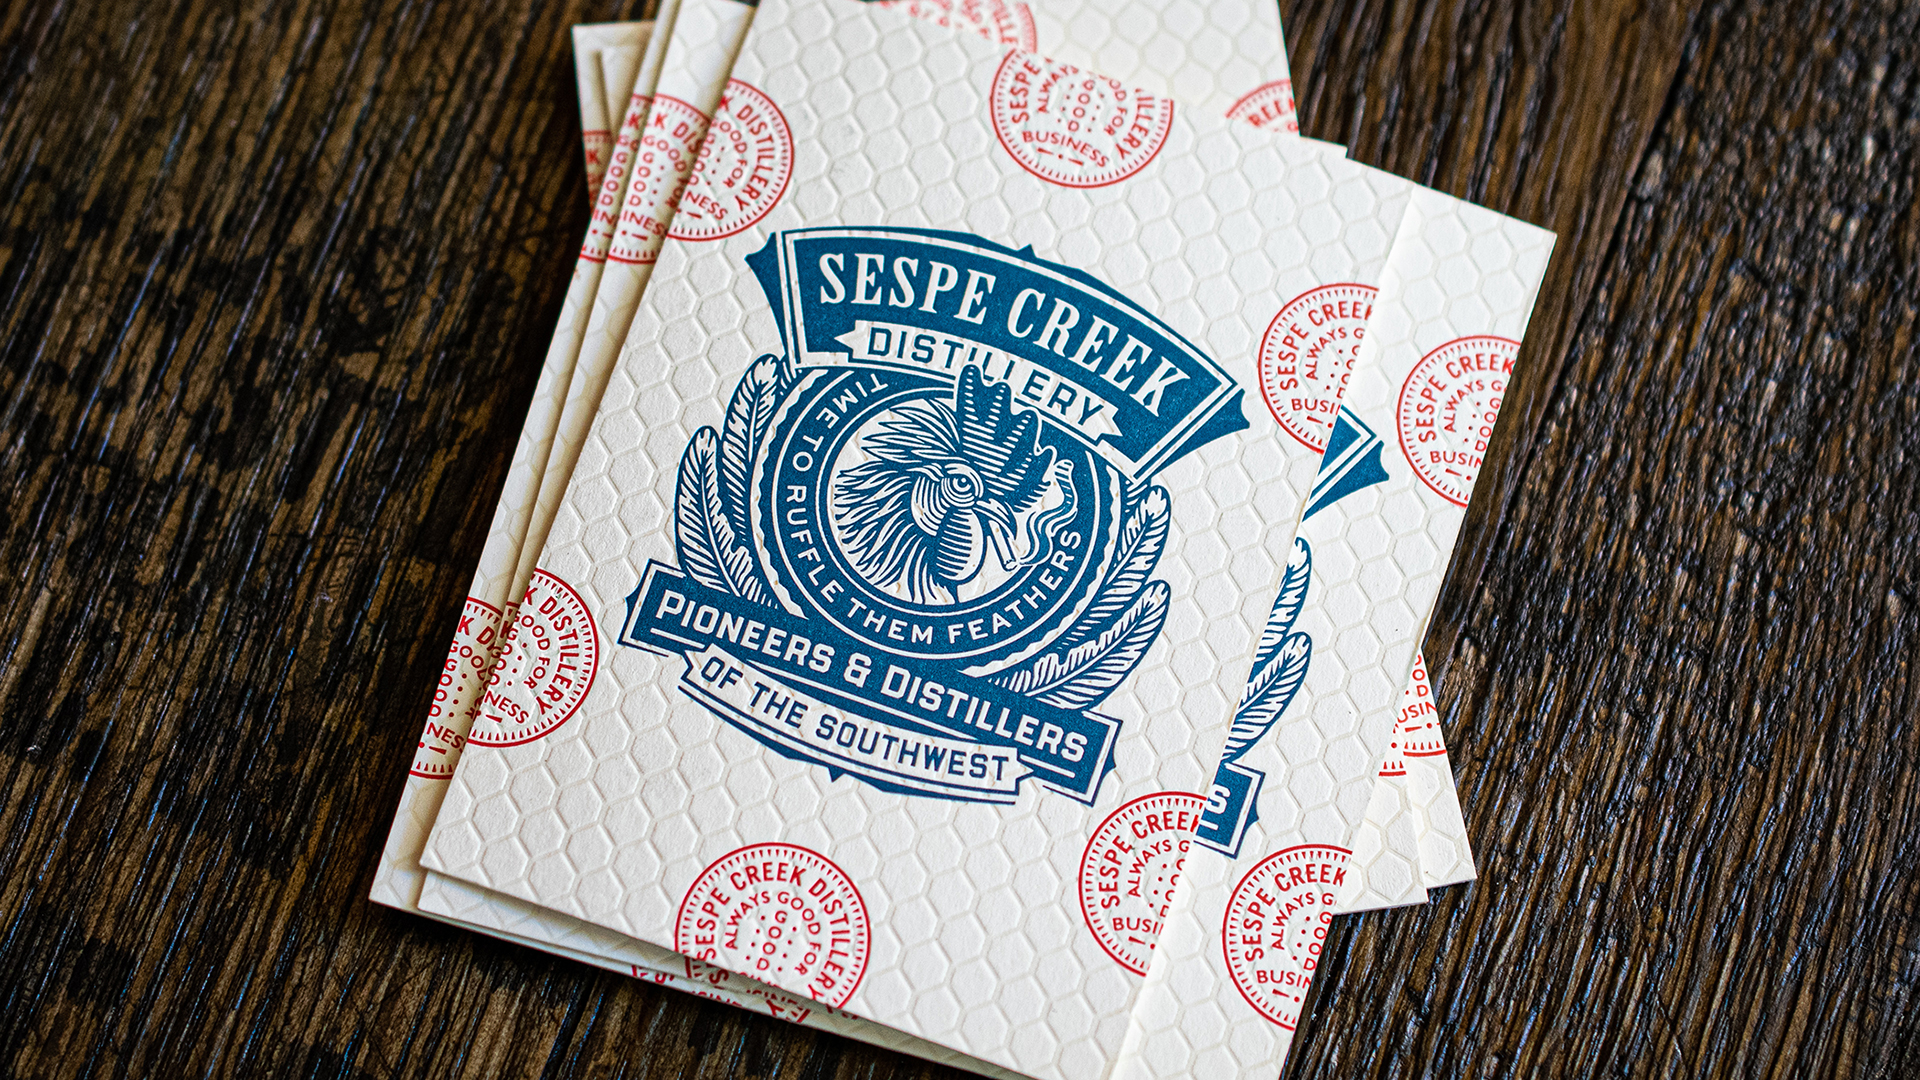 Good example of letterpress and debossing techniques on business cards from Sespe Creek Distillery designed by Chad Michael Studio